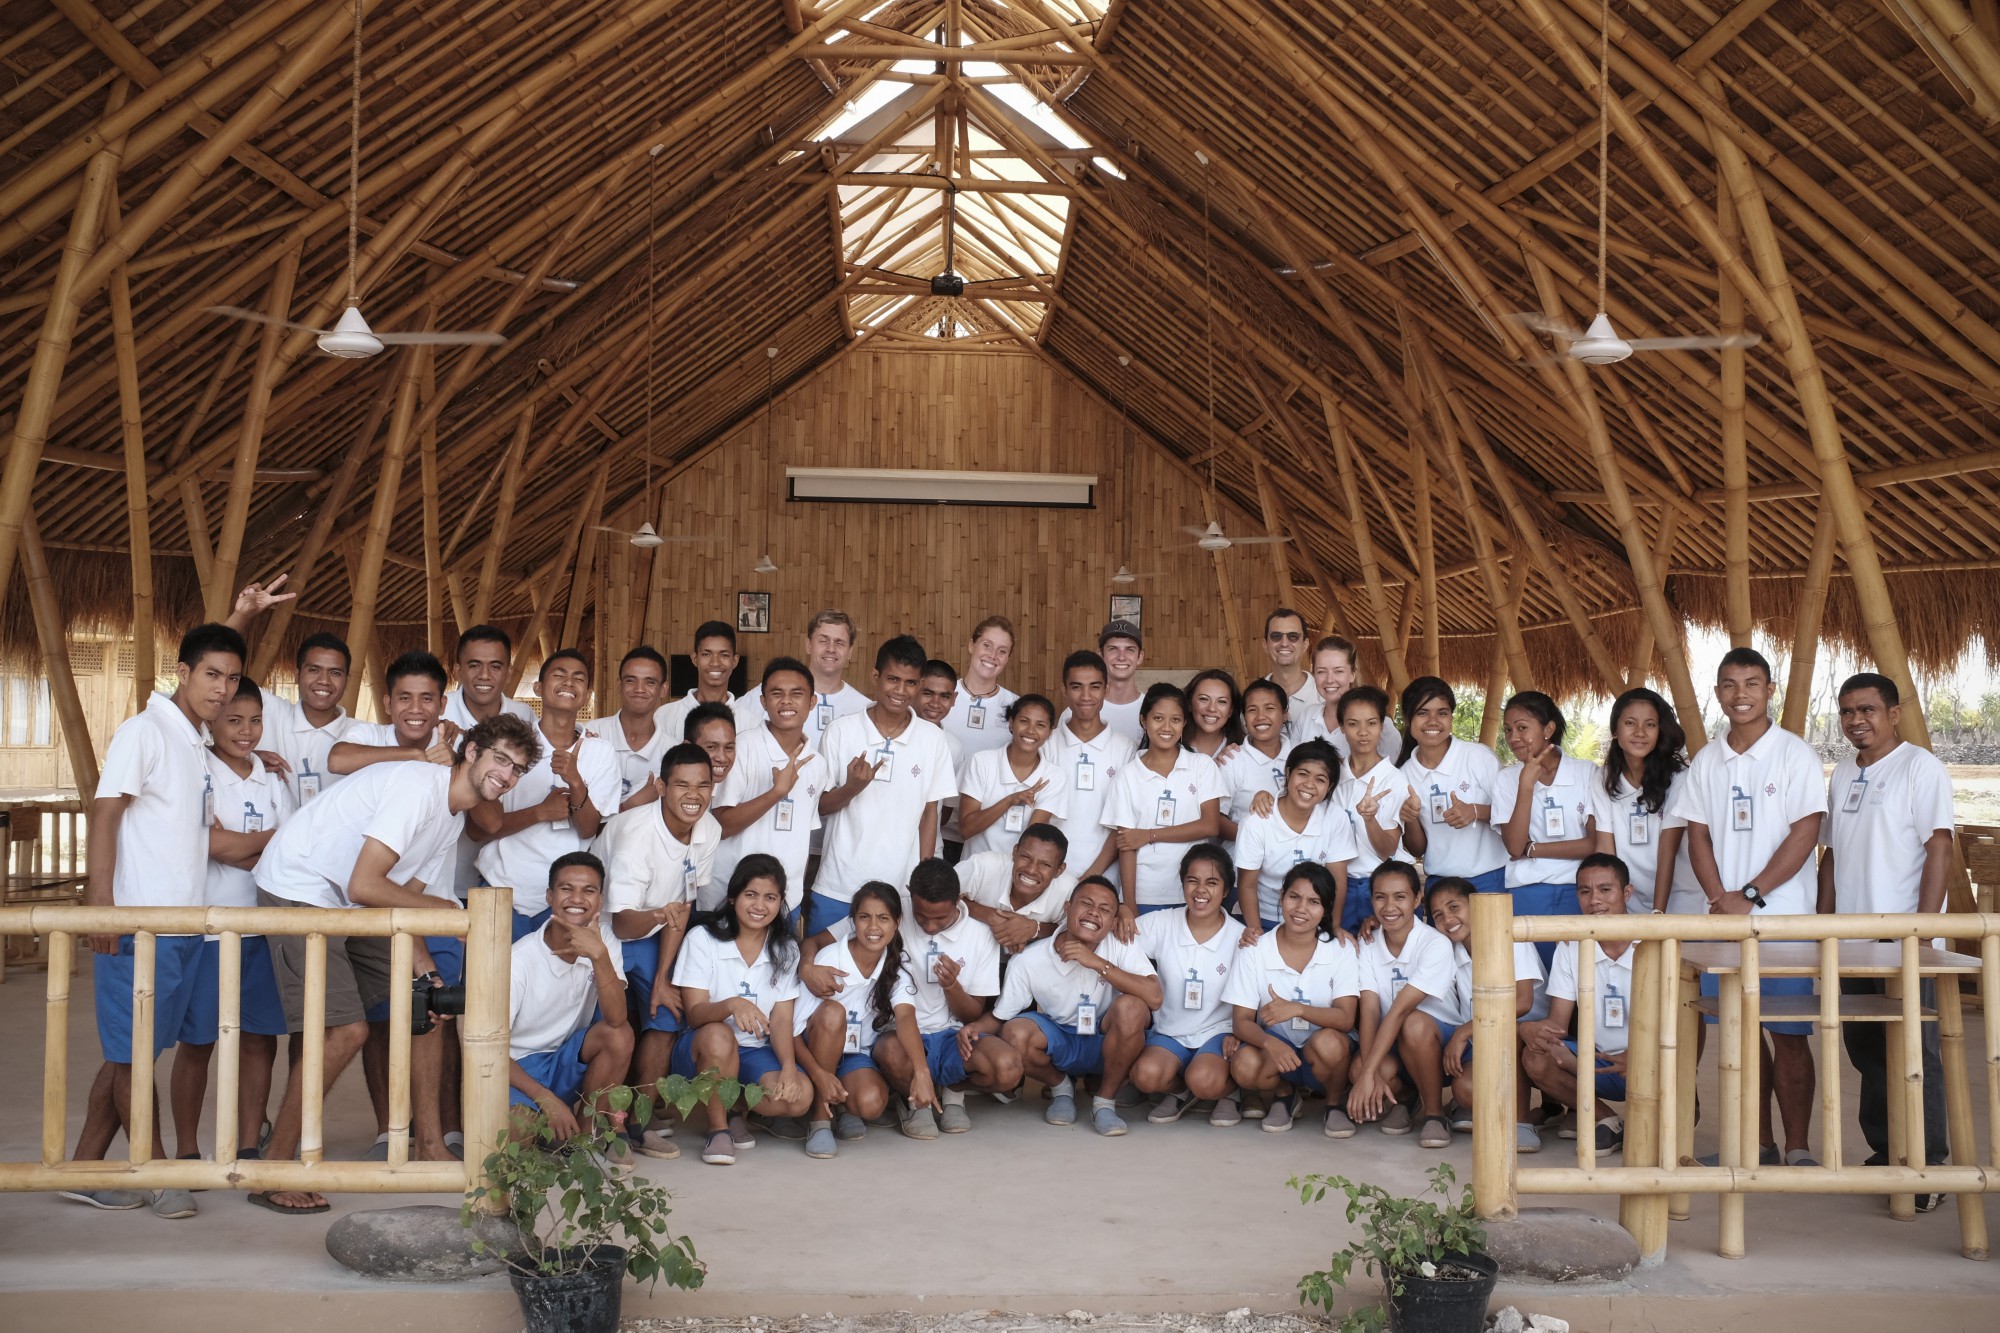 Home to the Sumba Hospitality Foundation (SHF), the youth are excited to welcome the increasing number of tourists.